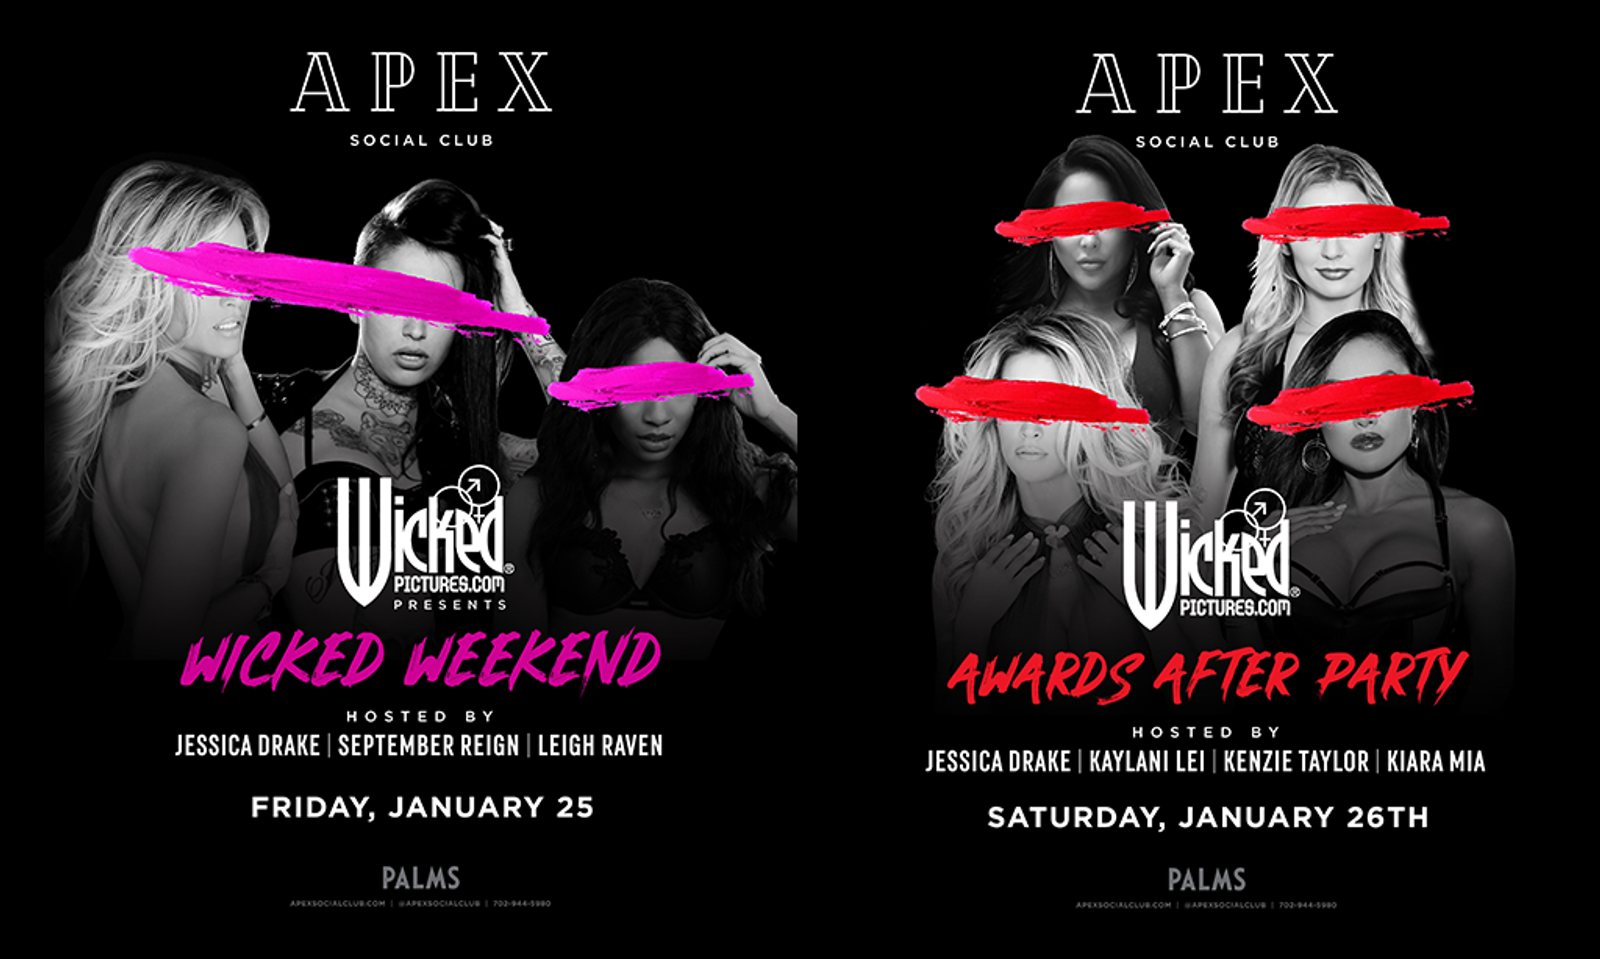 Wicked Pictures to Party at Apex Social Club in Vegas During AEE